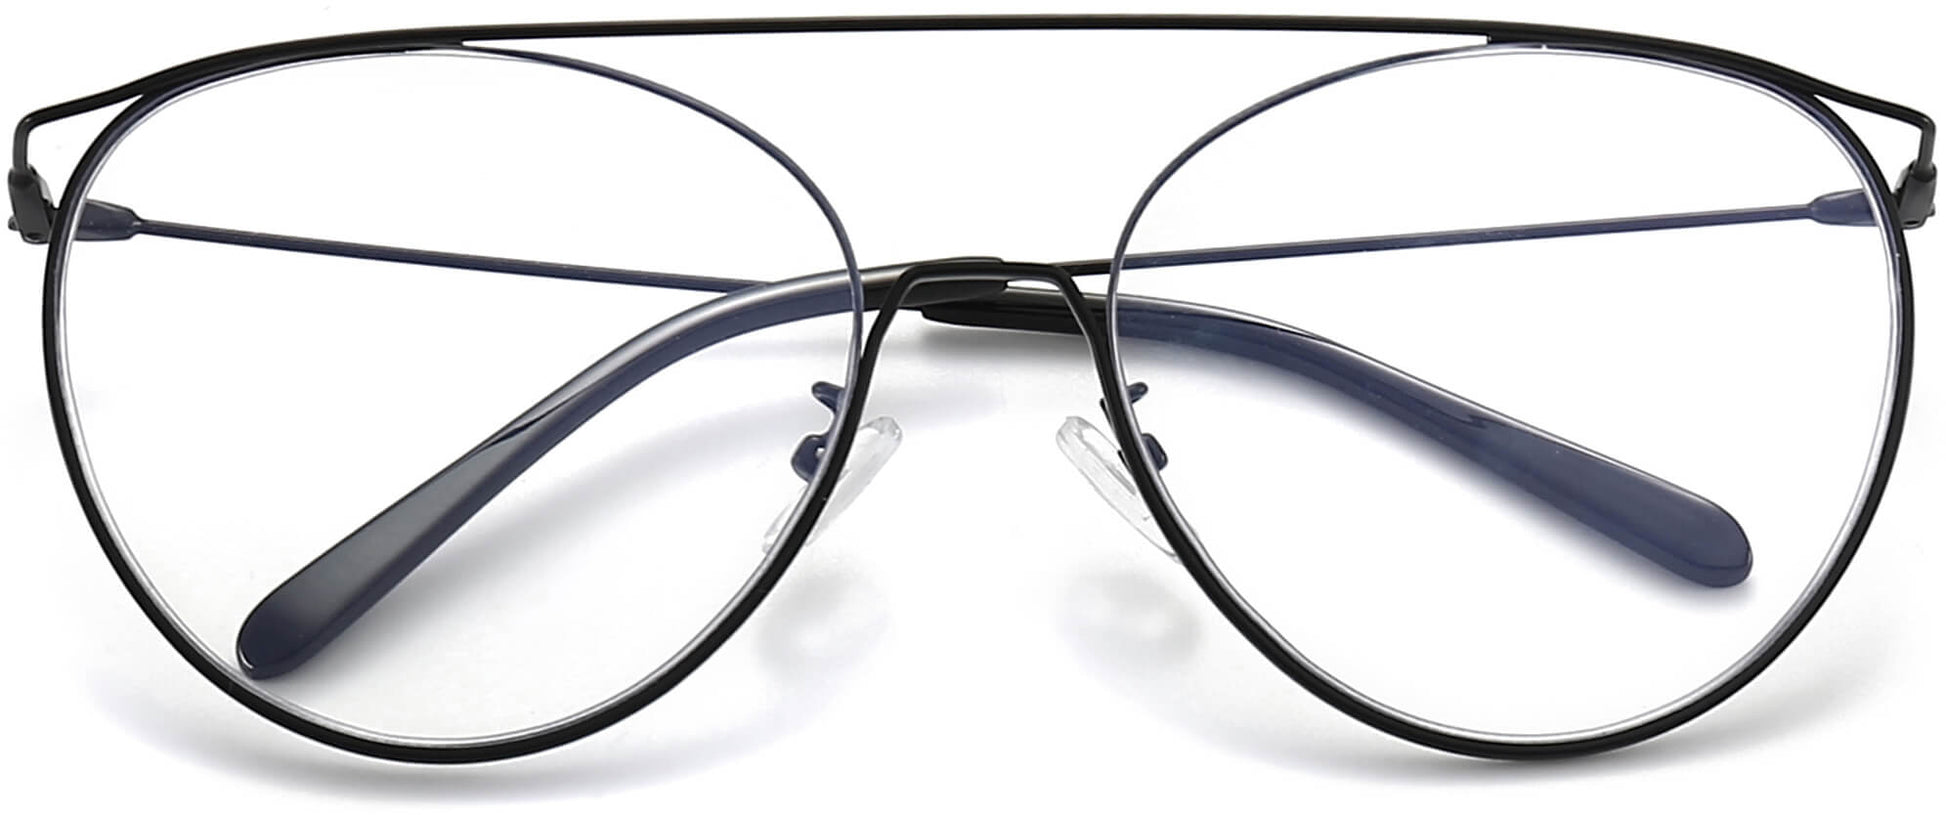 Zaire Round Black Eyeglasses from ANRRI, closed view